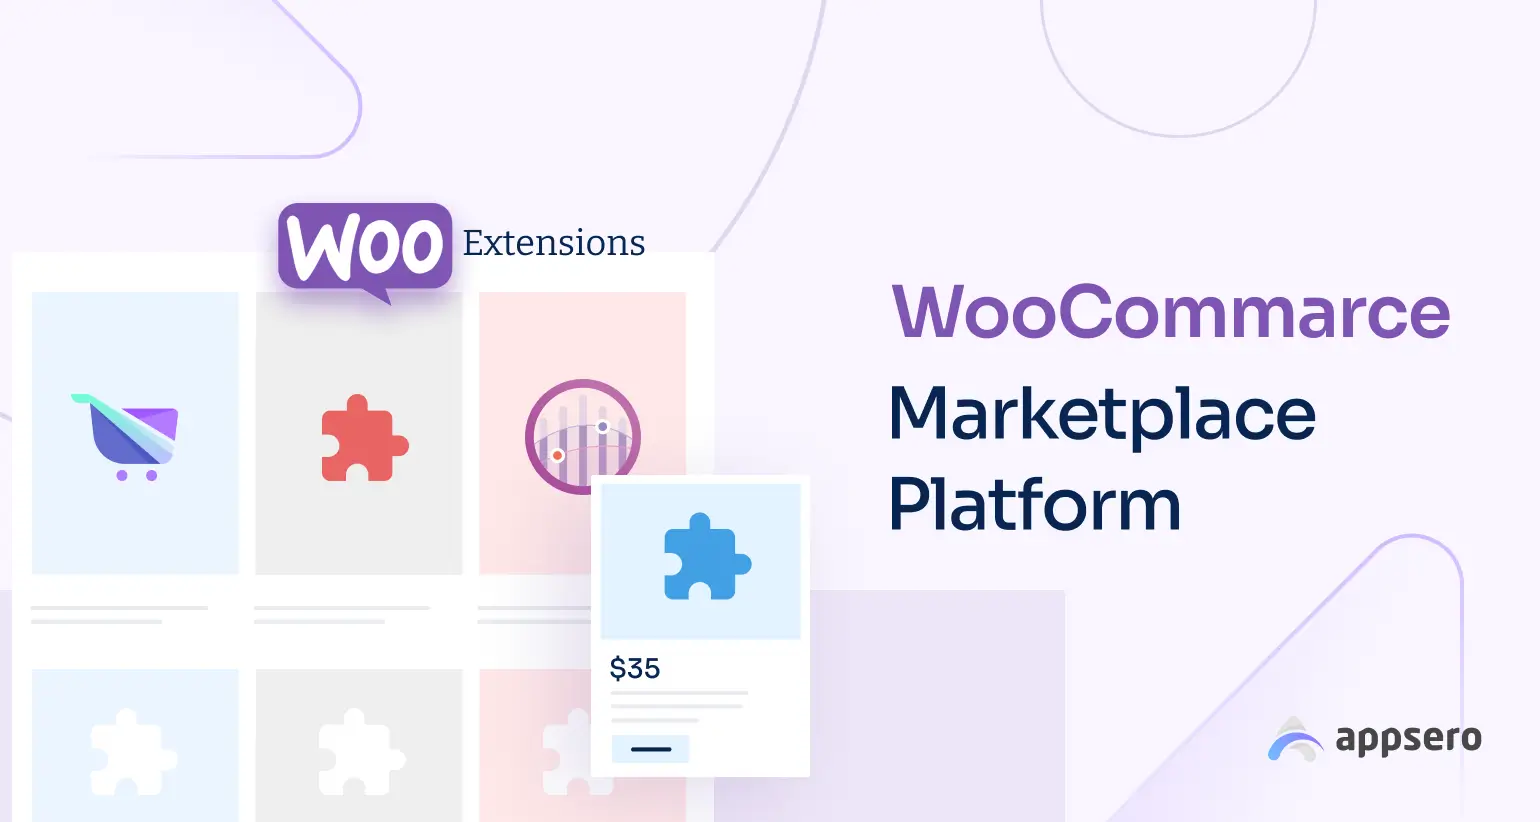 Is WooCommerce Marketplace a Great Platform to Sell WooCommerce Extensions?